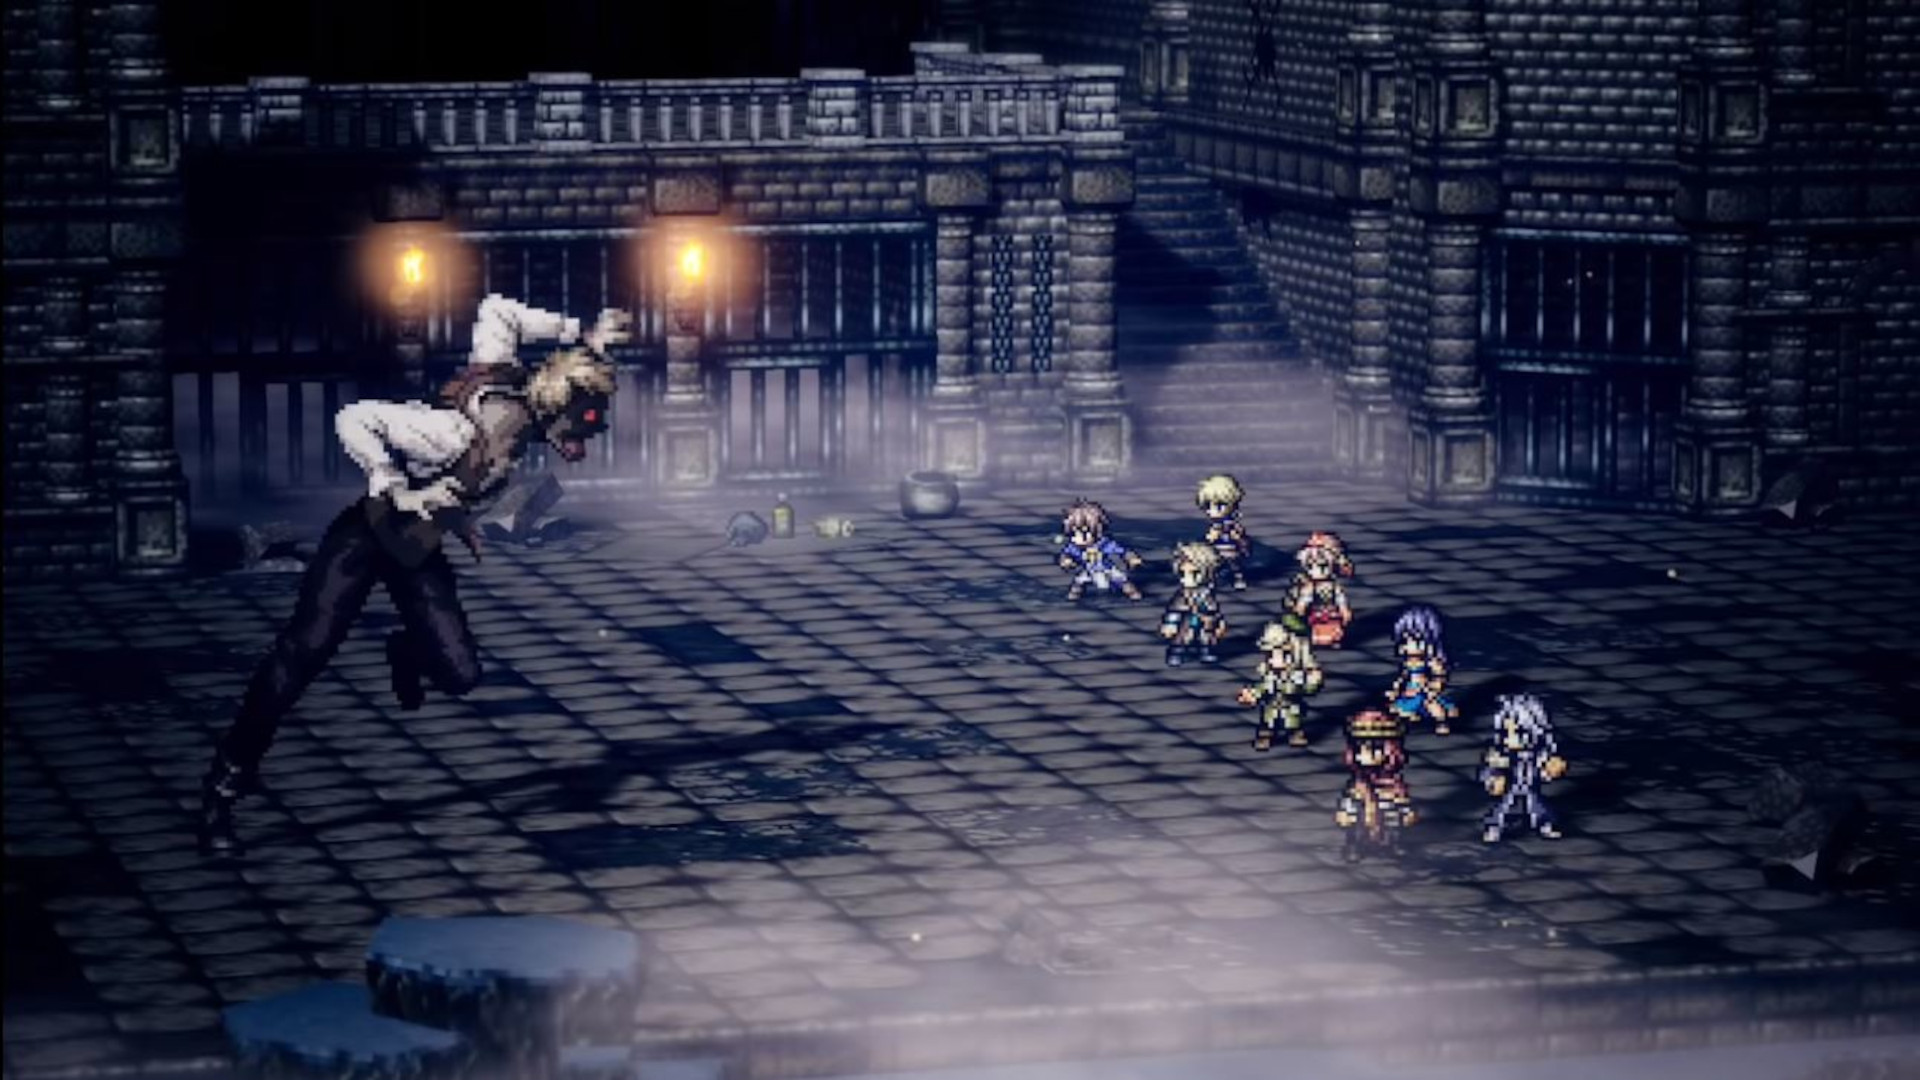 OCTOPATH TRAVELER: CotC - Apps on Google Play